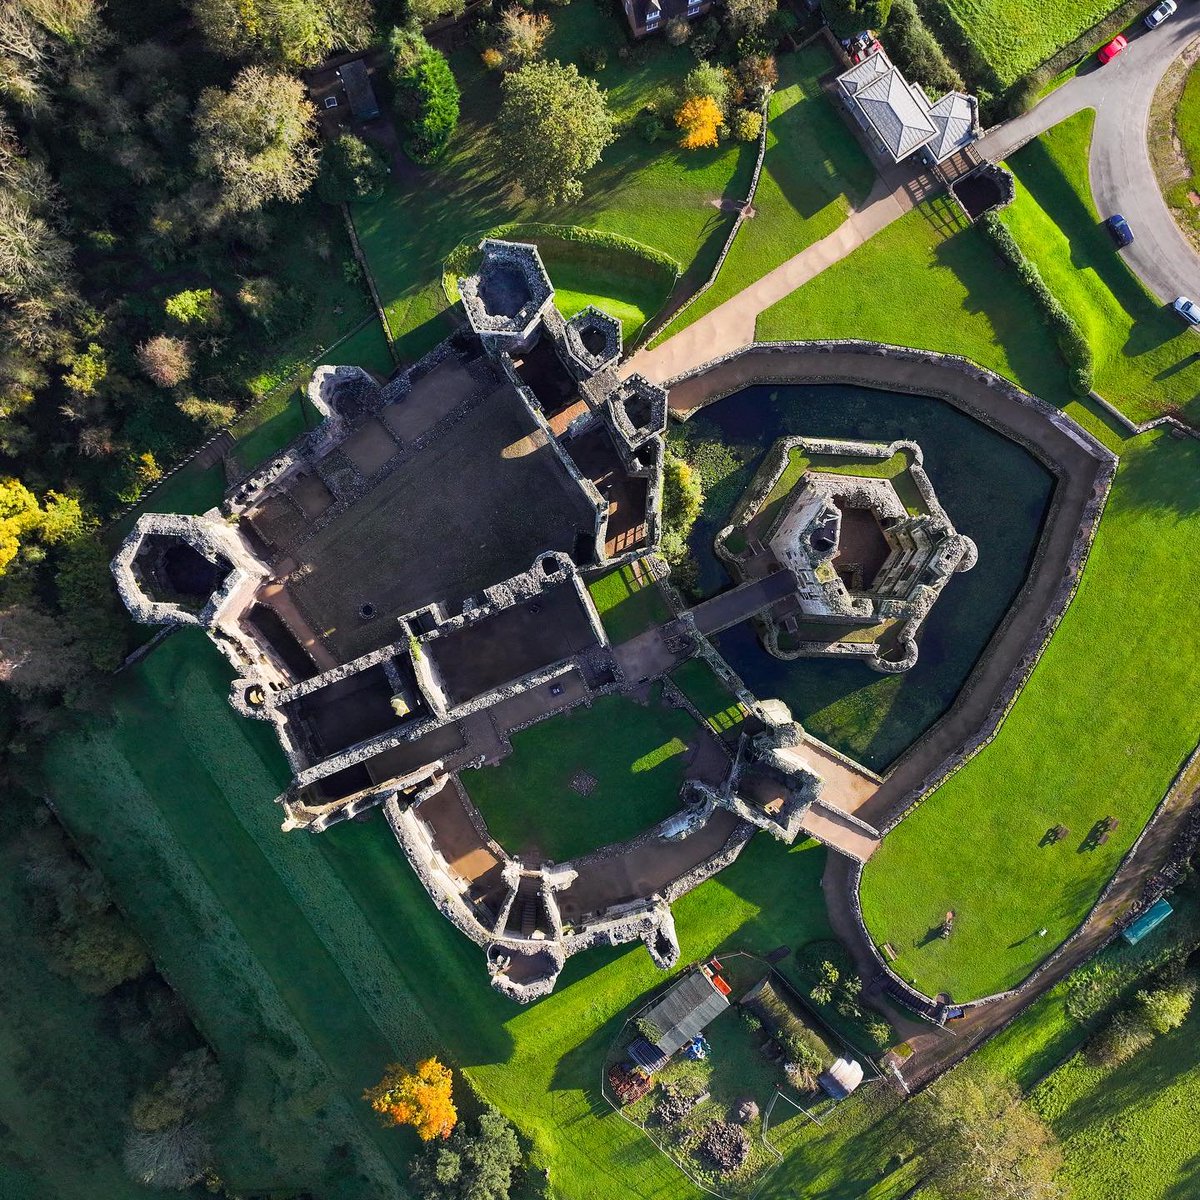 A great view of Raglan Castle here from the sky. You can see the gatehouse at the top, with the hexagonal great tower on the right.

Thankfully they took the roof off to make it a bit easier to see inside...

#lovemonmouthshire